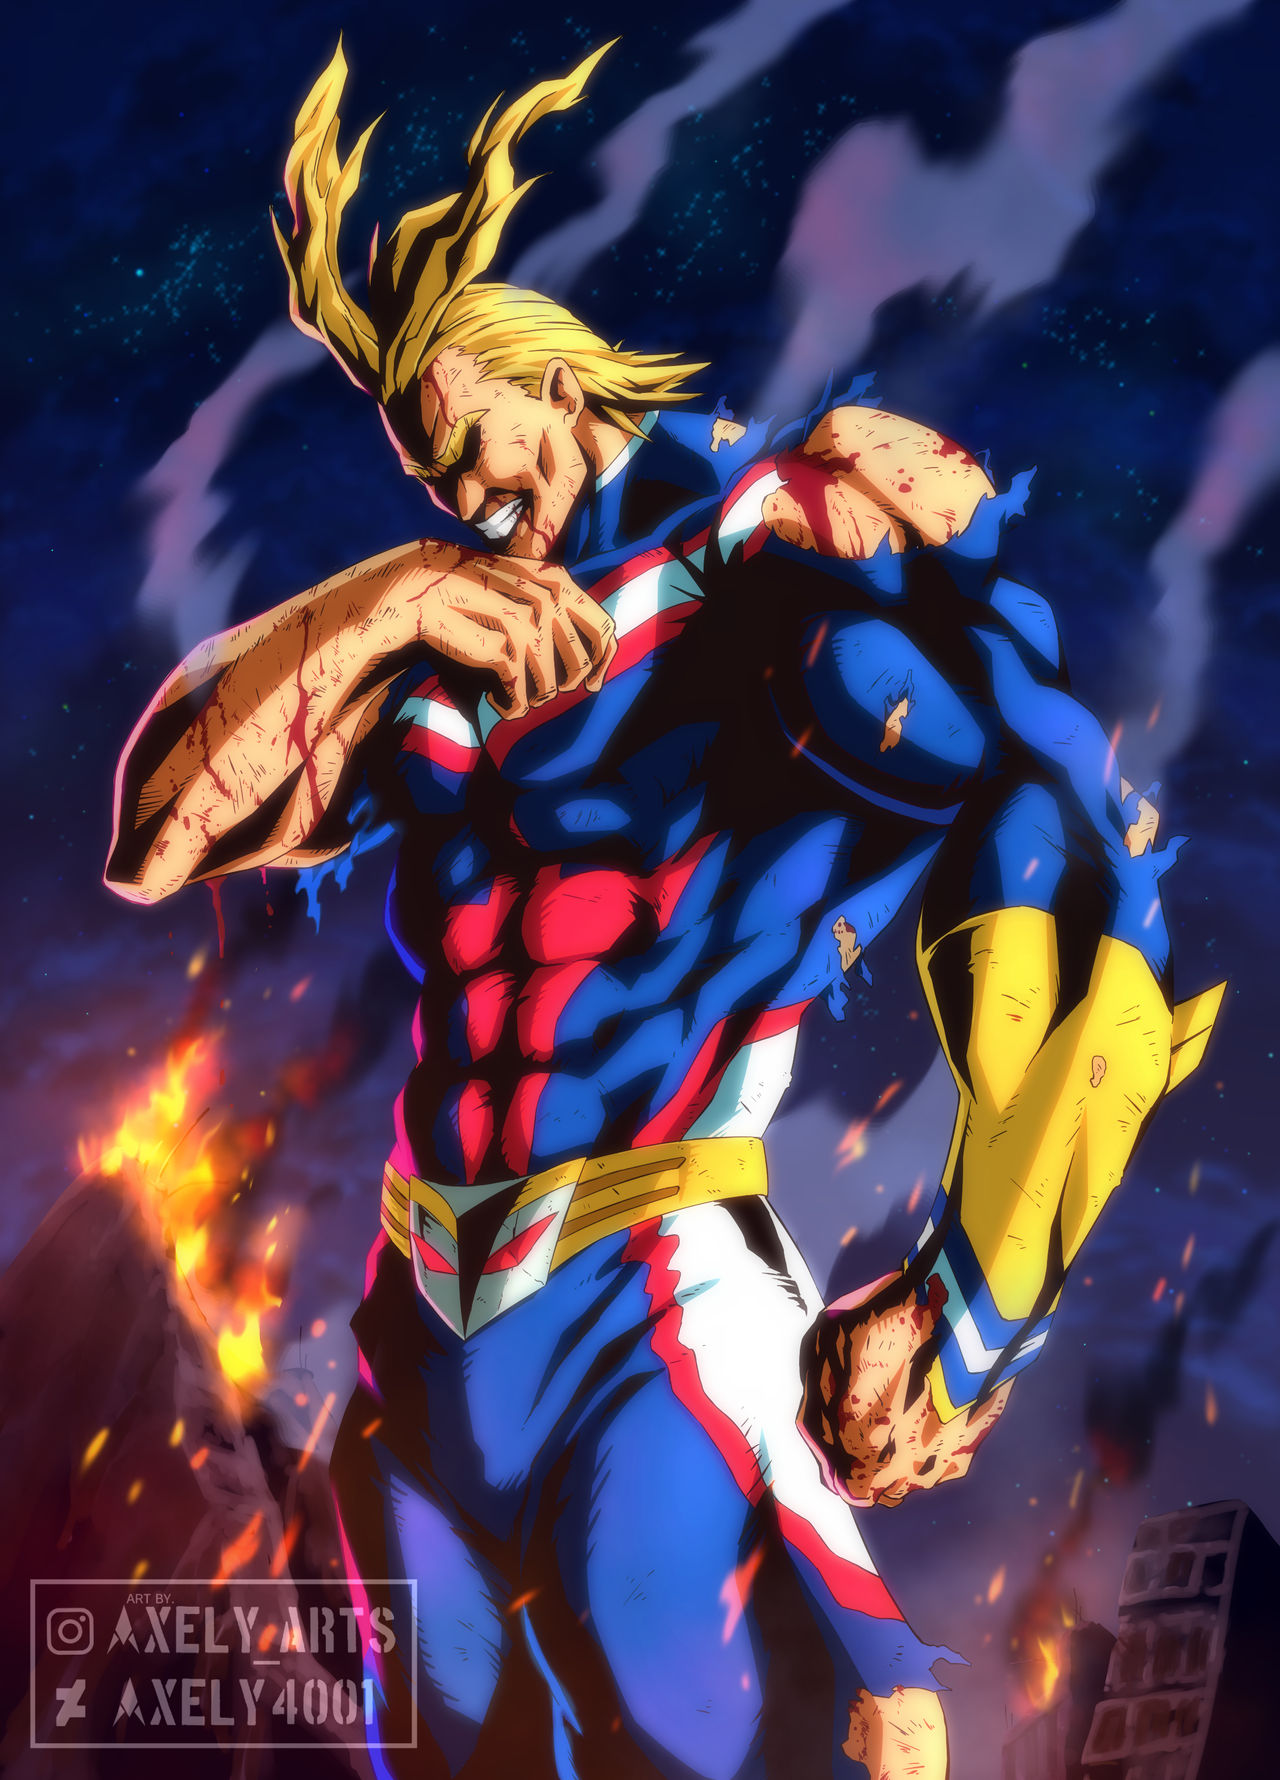 all_might__fanart__by_axely4001_dg8t2i7-fullview.jpg